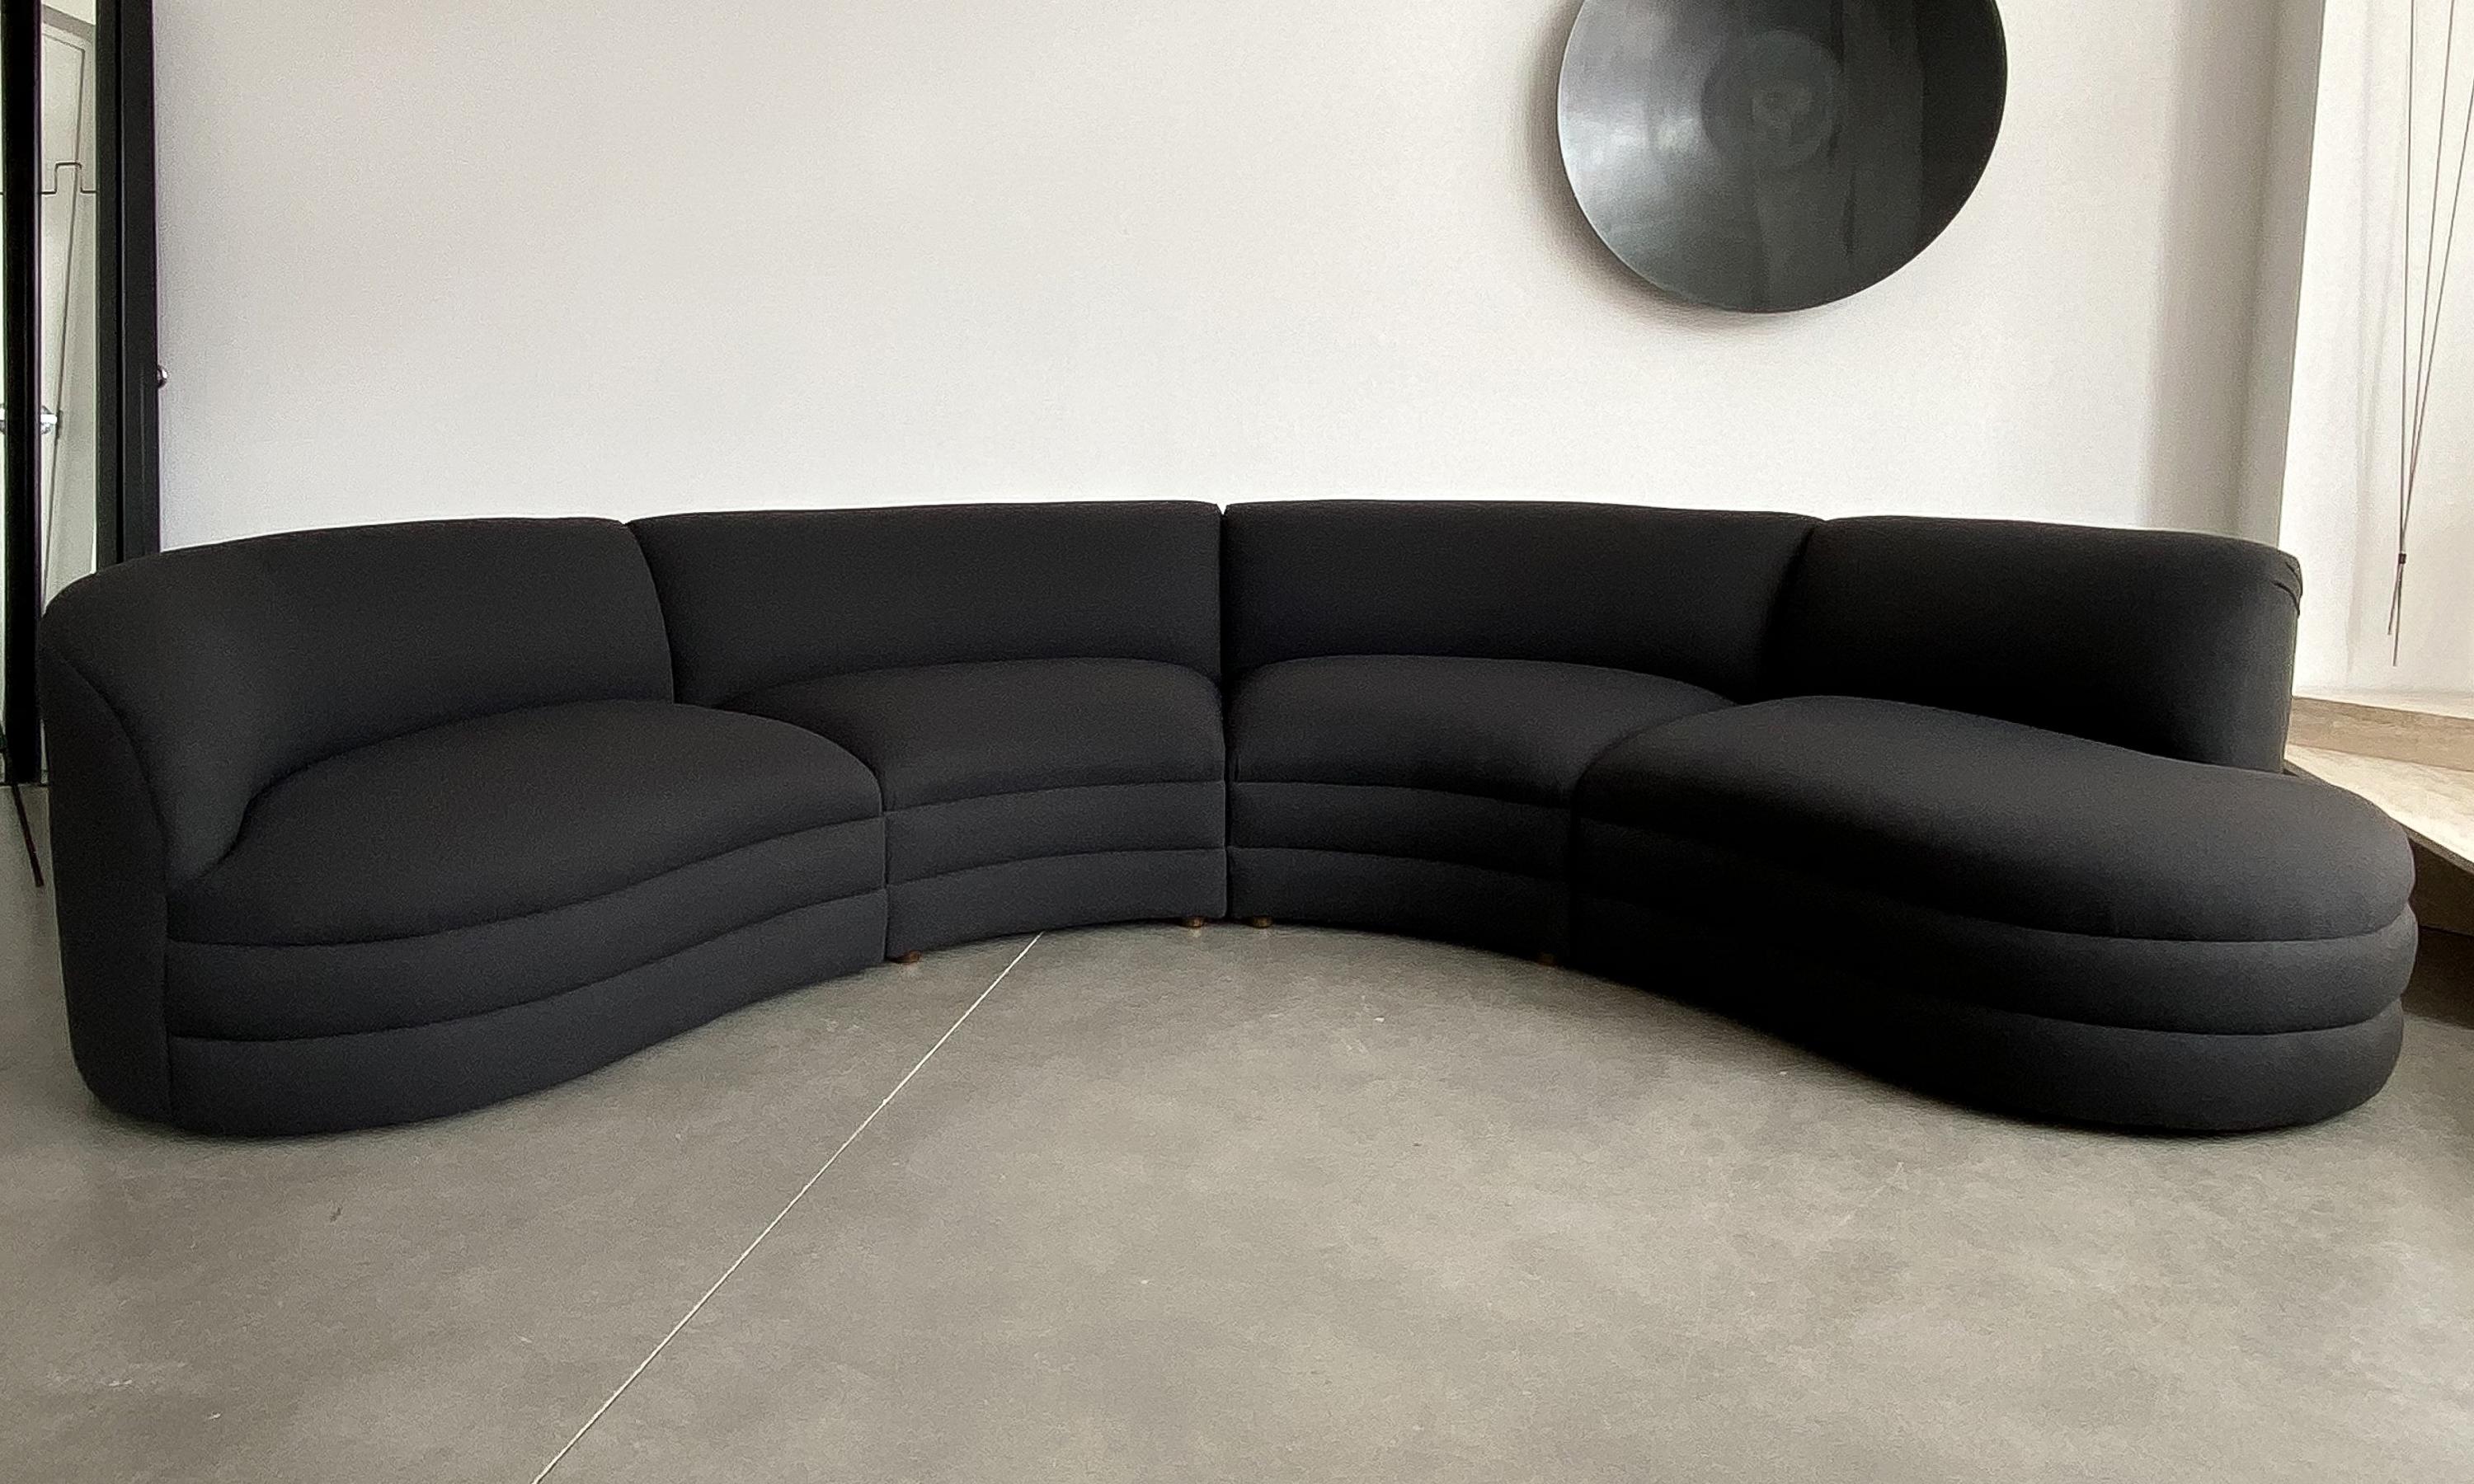 Four piece curved sectional sofa attributed to Vladimir Kagan for either Directional or Weiman, circa late 20th century. Upholstered in the original black fabric. Upholstery is in good condition but shows some fading along back and some